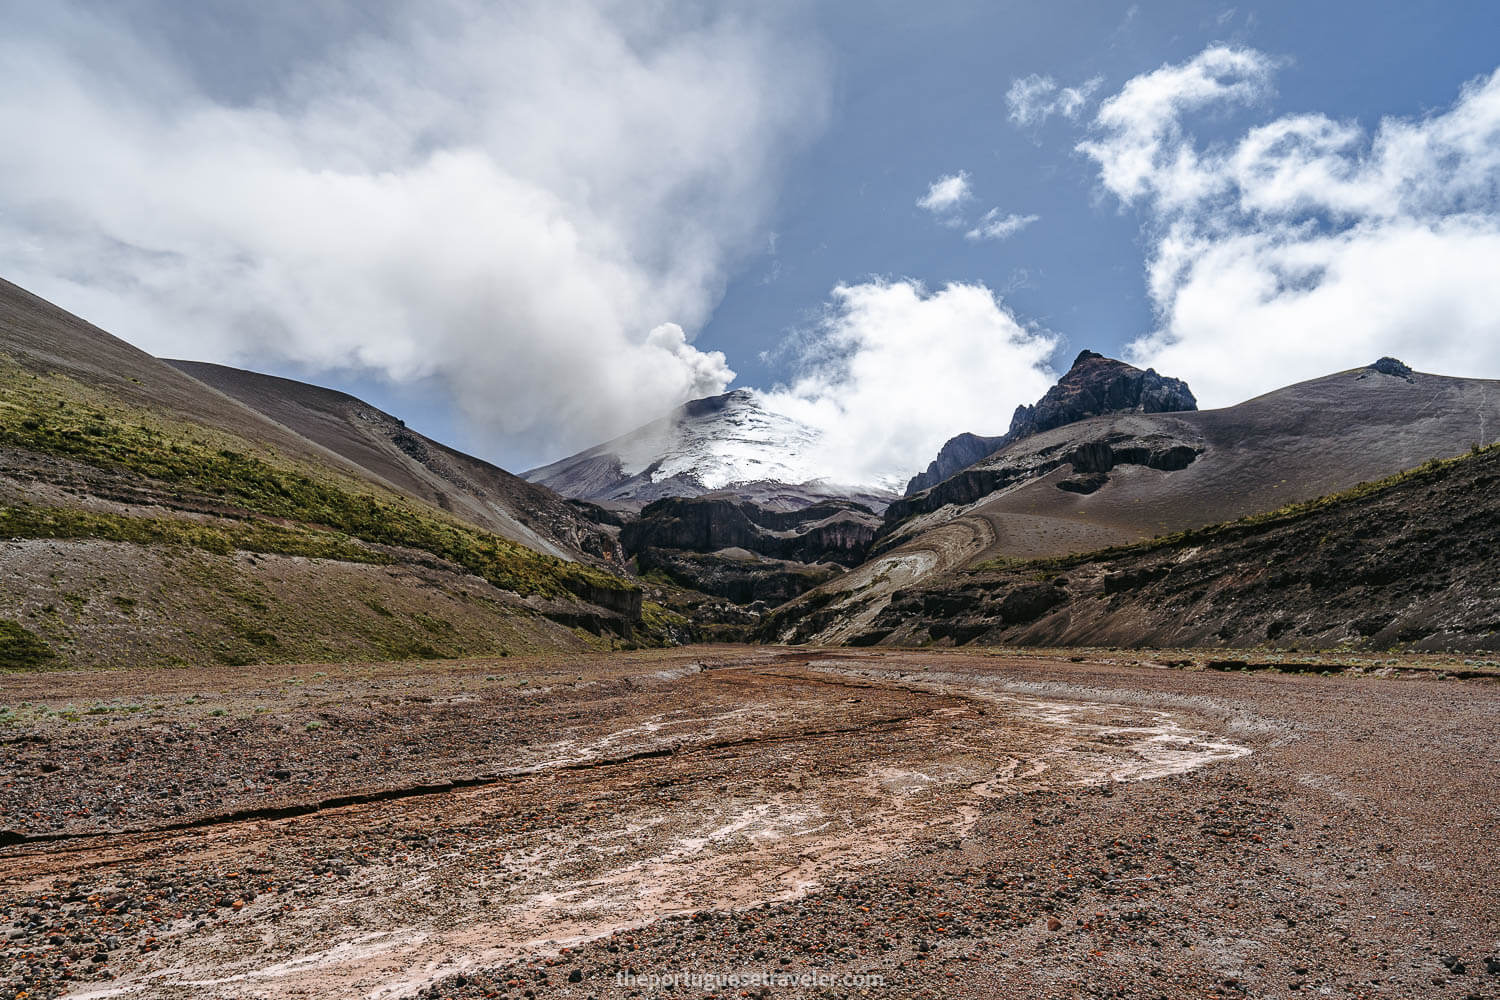 The landslide/lava canyon/lahar of Cotopaxi